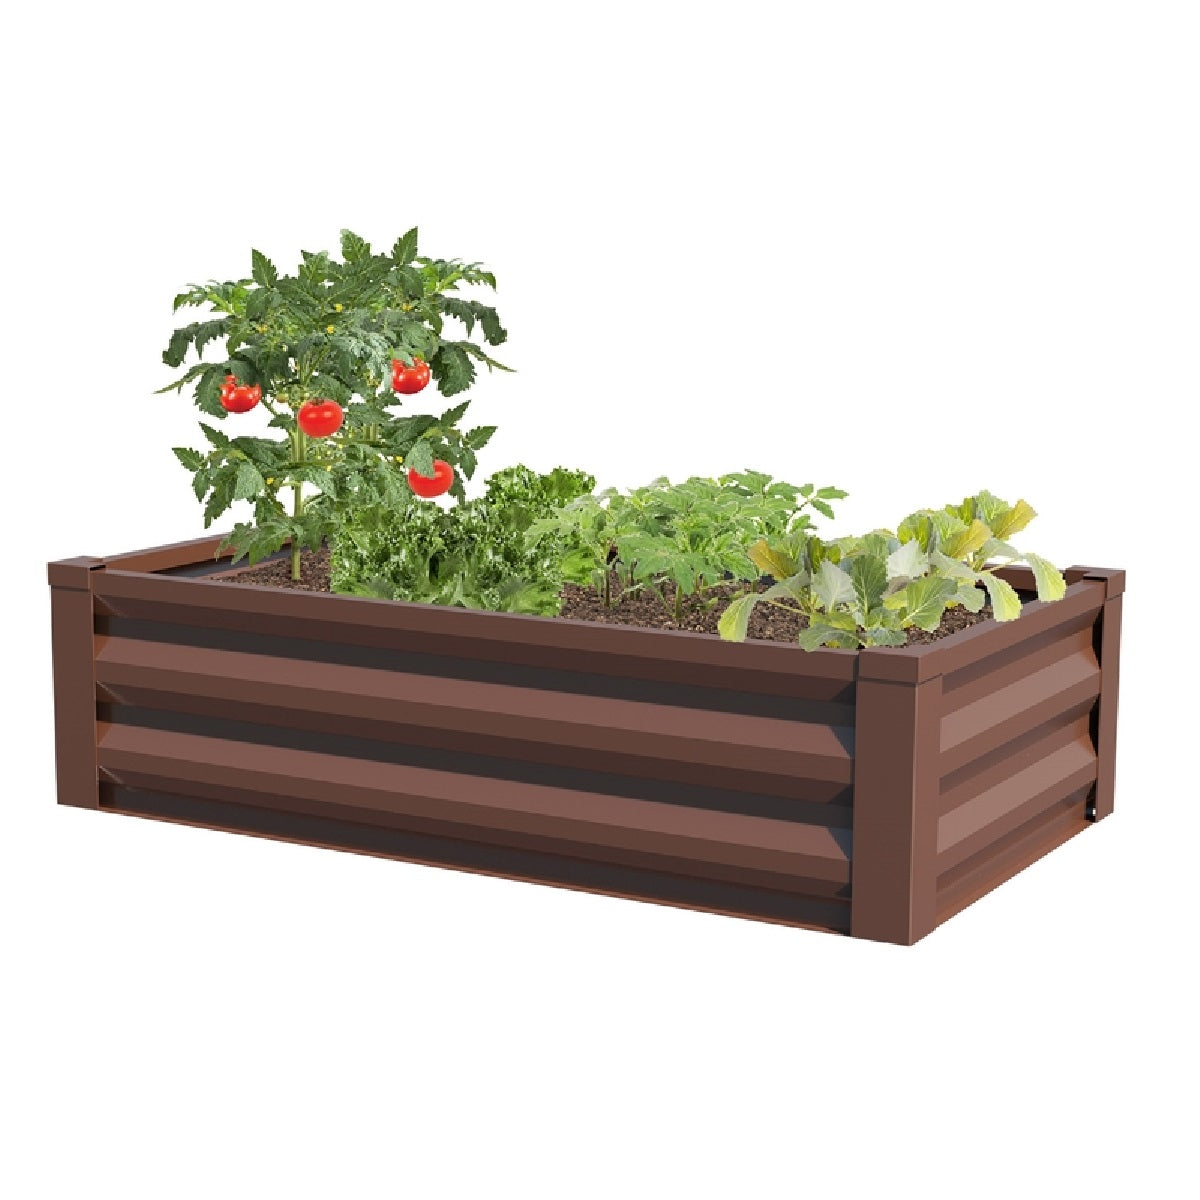 buy raised garden kits at cheap rate in bulk. wholesale & retail garden supplies & fencing store.